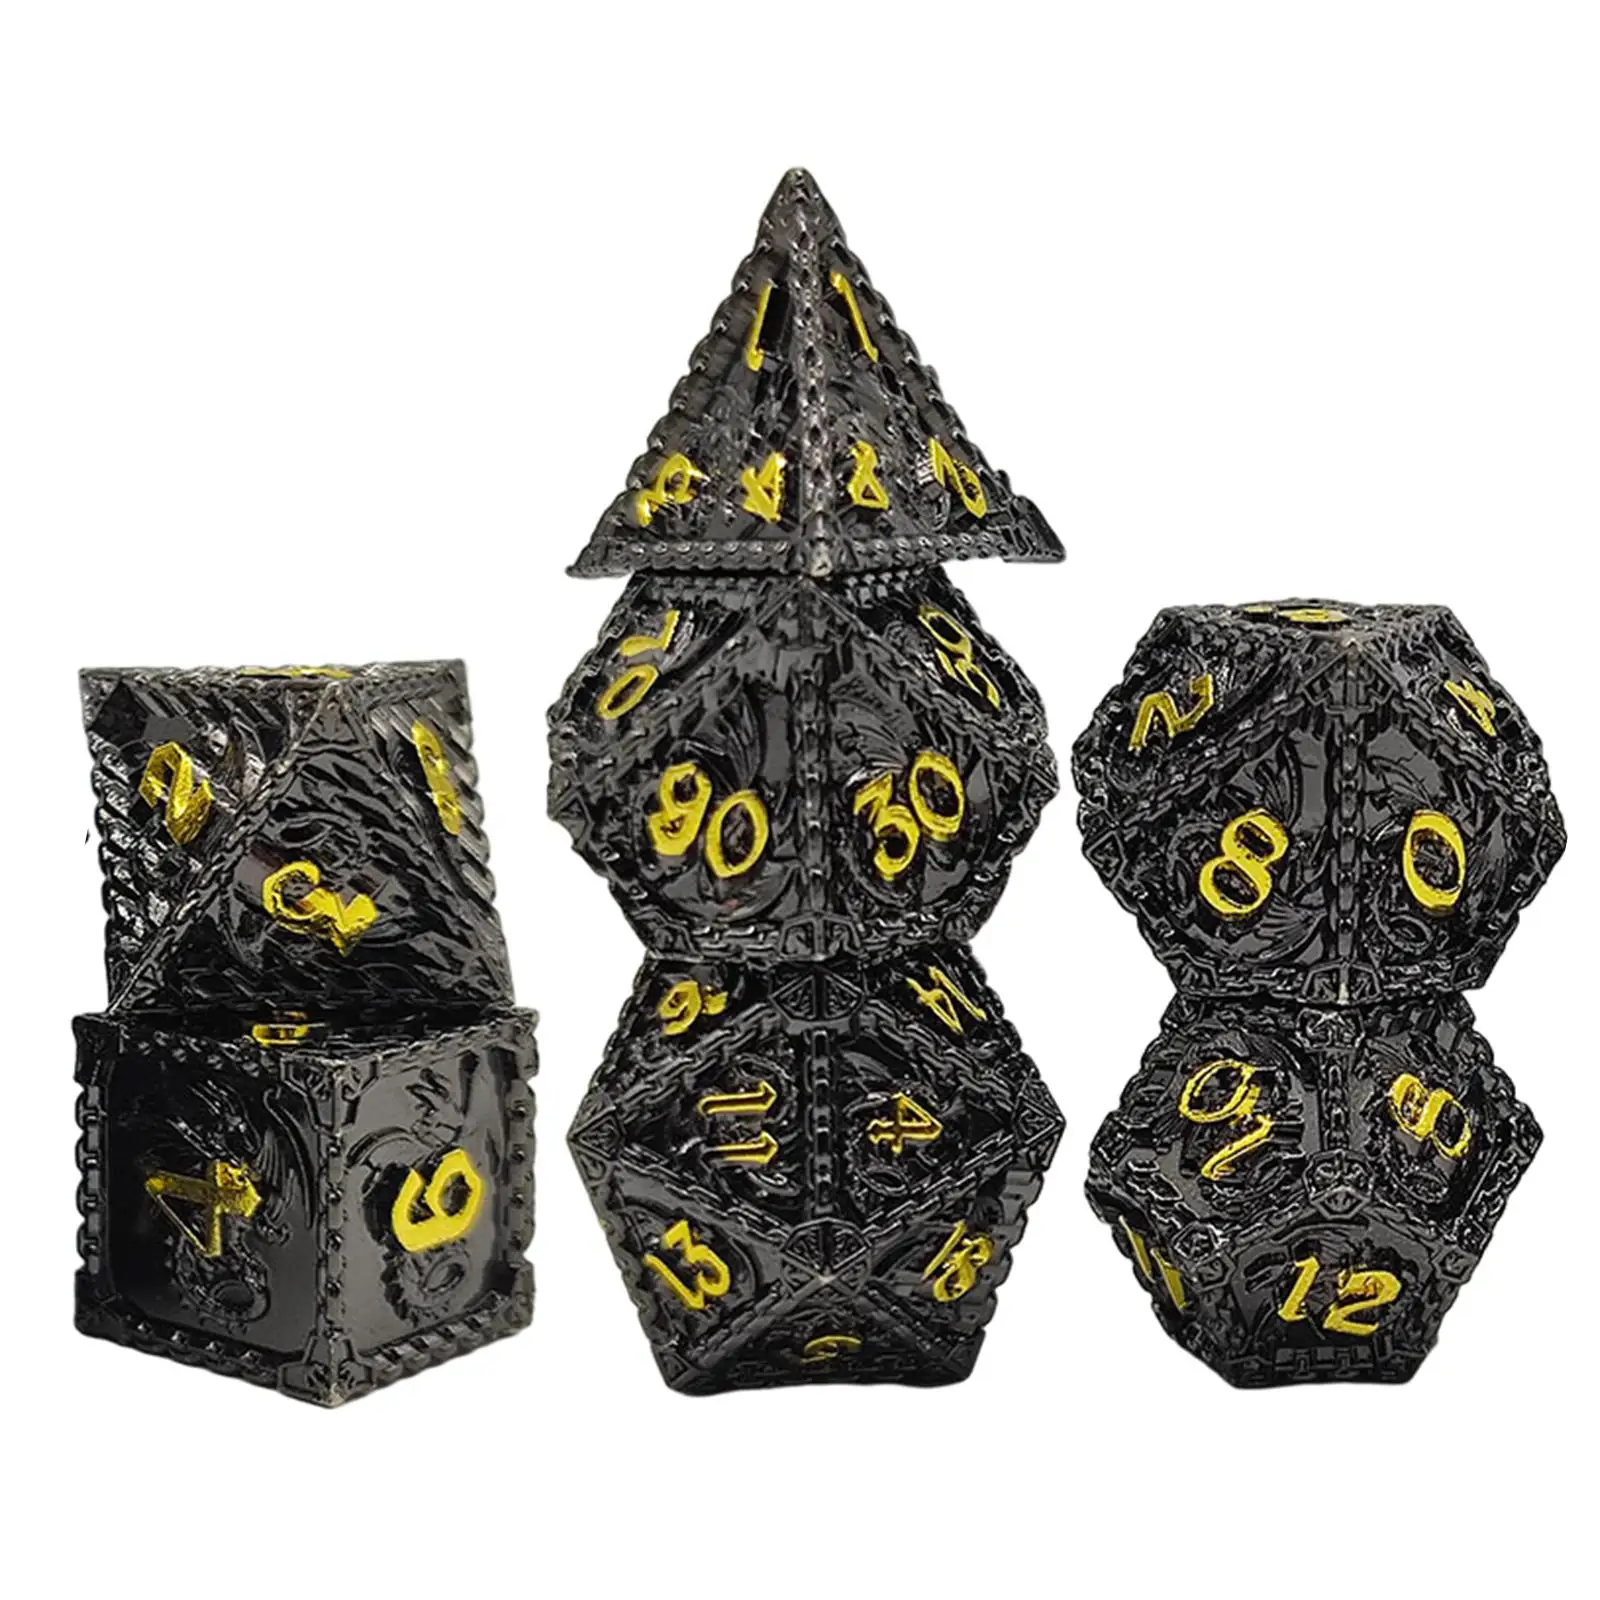 7 Pieces Polyhedral Dice Party Supply Irregular Role Playing Dice for DND RPG MTG